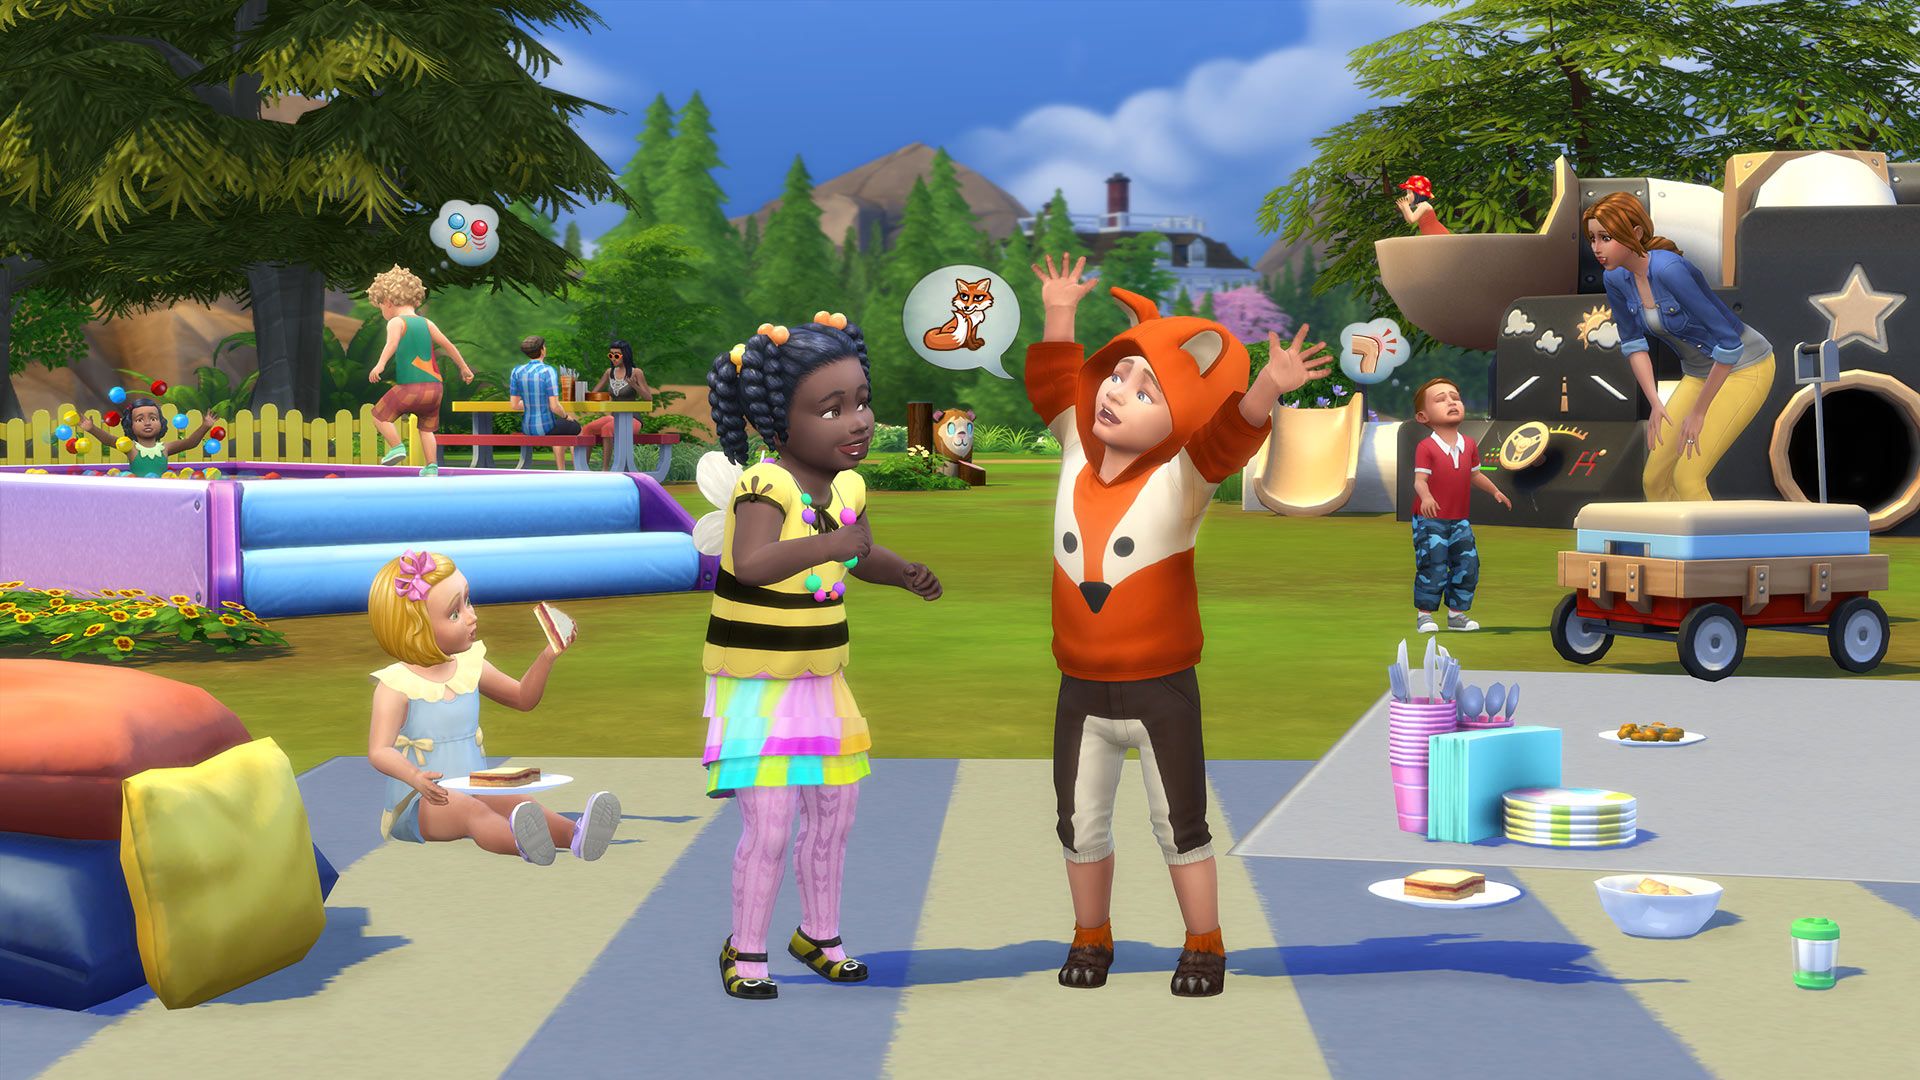 The Sims 4: Toddler Stuff - Build & Buy Overview